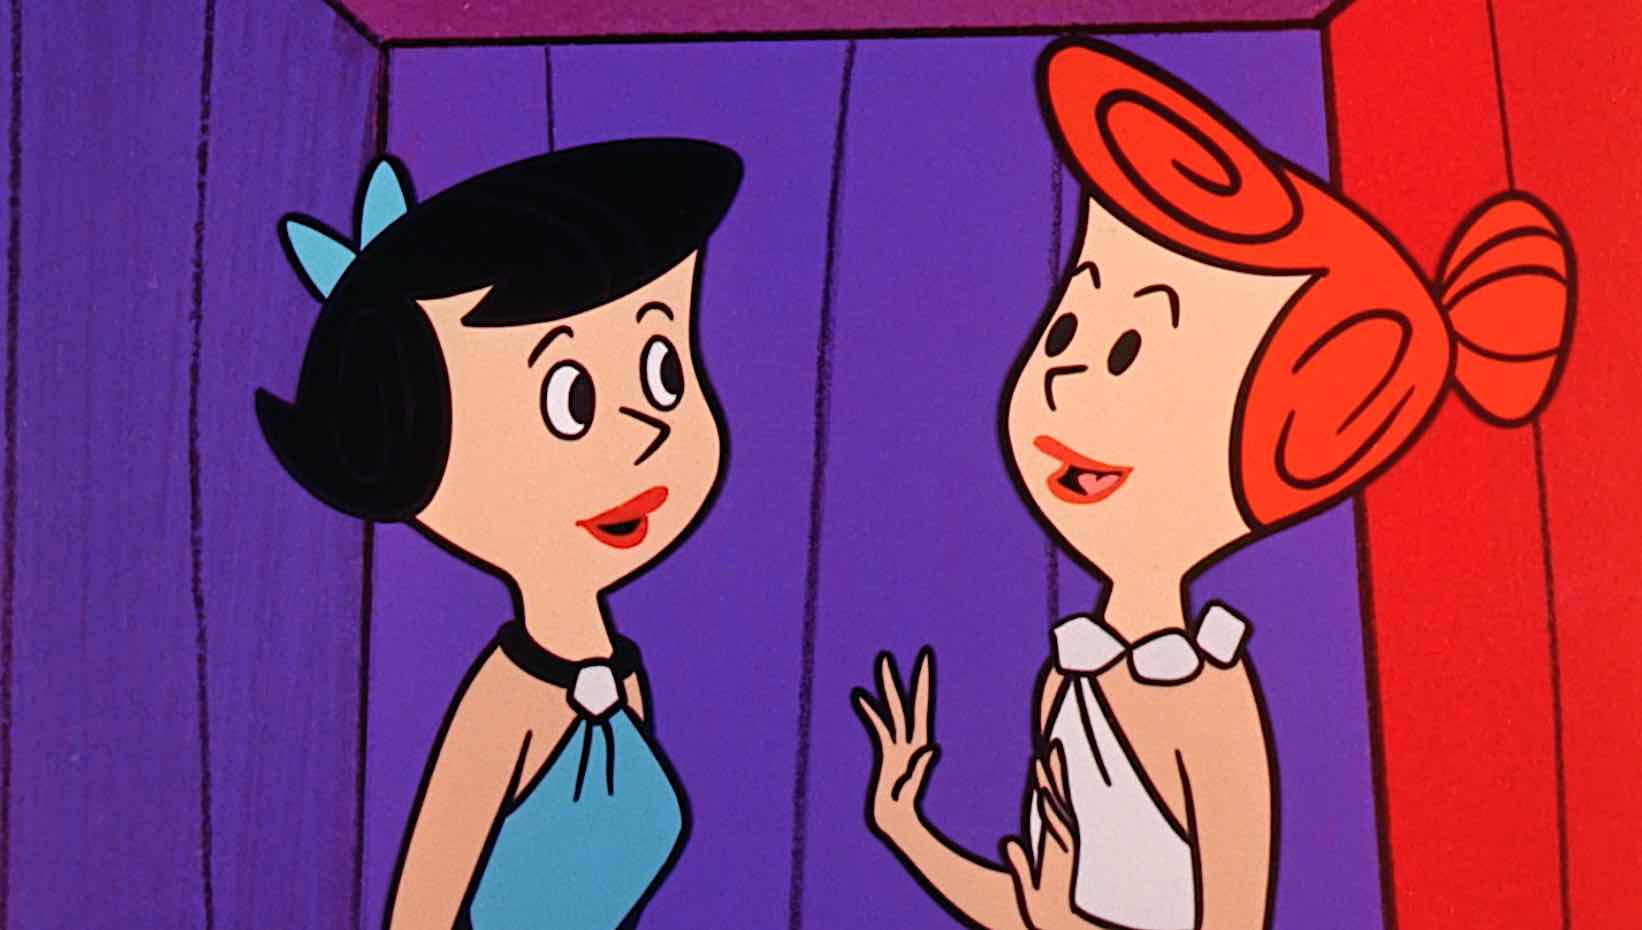 Despite being fairly formulaic, The Flintstones is perfect comfort viewing....